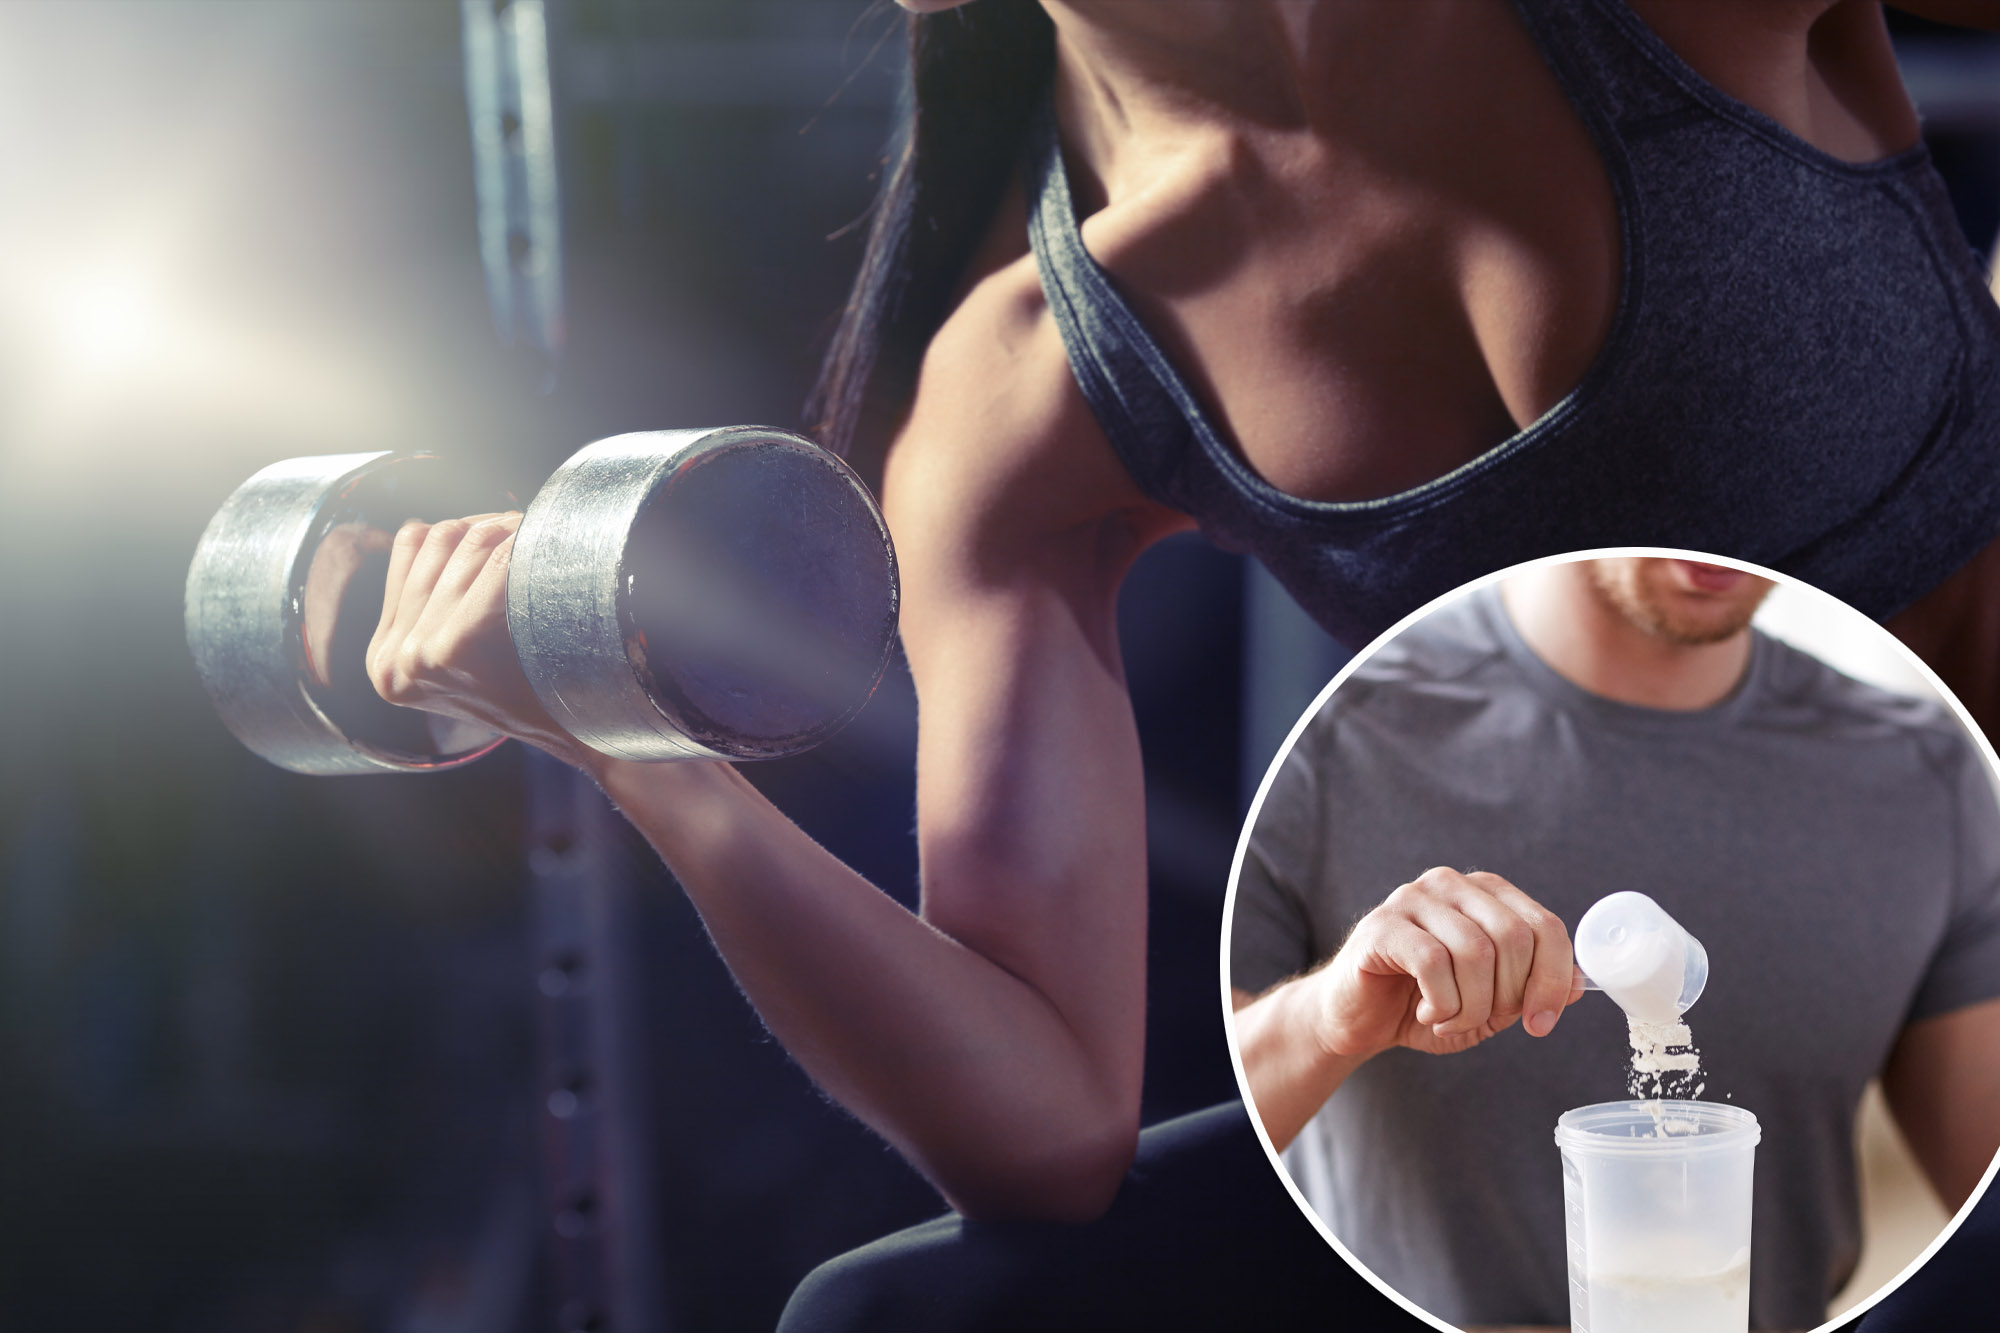 Julia Pugachevsky, a senior health reporter for Insider, revealed the pros and cons of taking Cellucor C4 pre-workout powder after reaching a plateau in strength training.